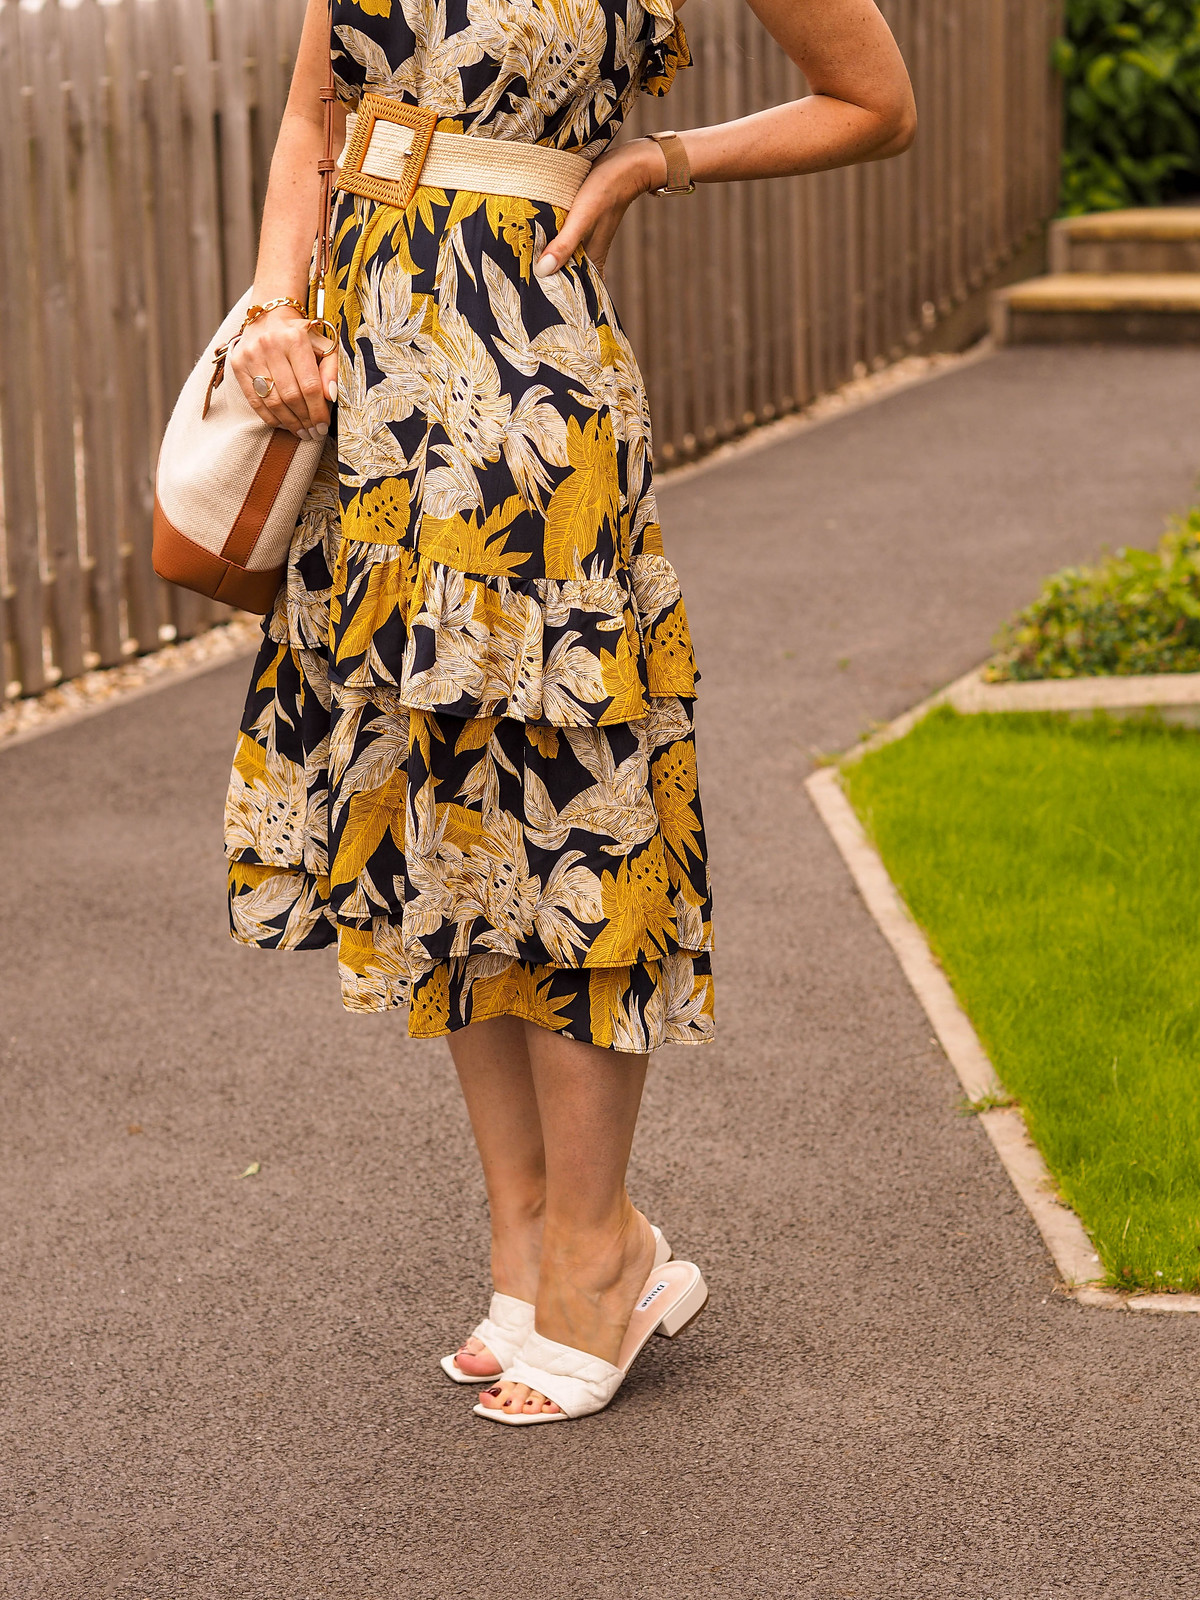 The Power of Accessories: Styling a Tiered Summer Dress (yellow/black/white dress with raffia belt, white slider sandals, brown/ecru shoulder bag, yellow lens glasses & a straw trilby) | Not Dressed As Lamb